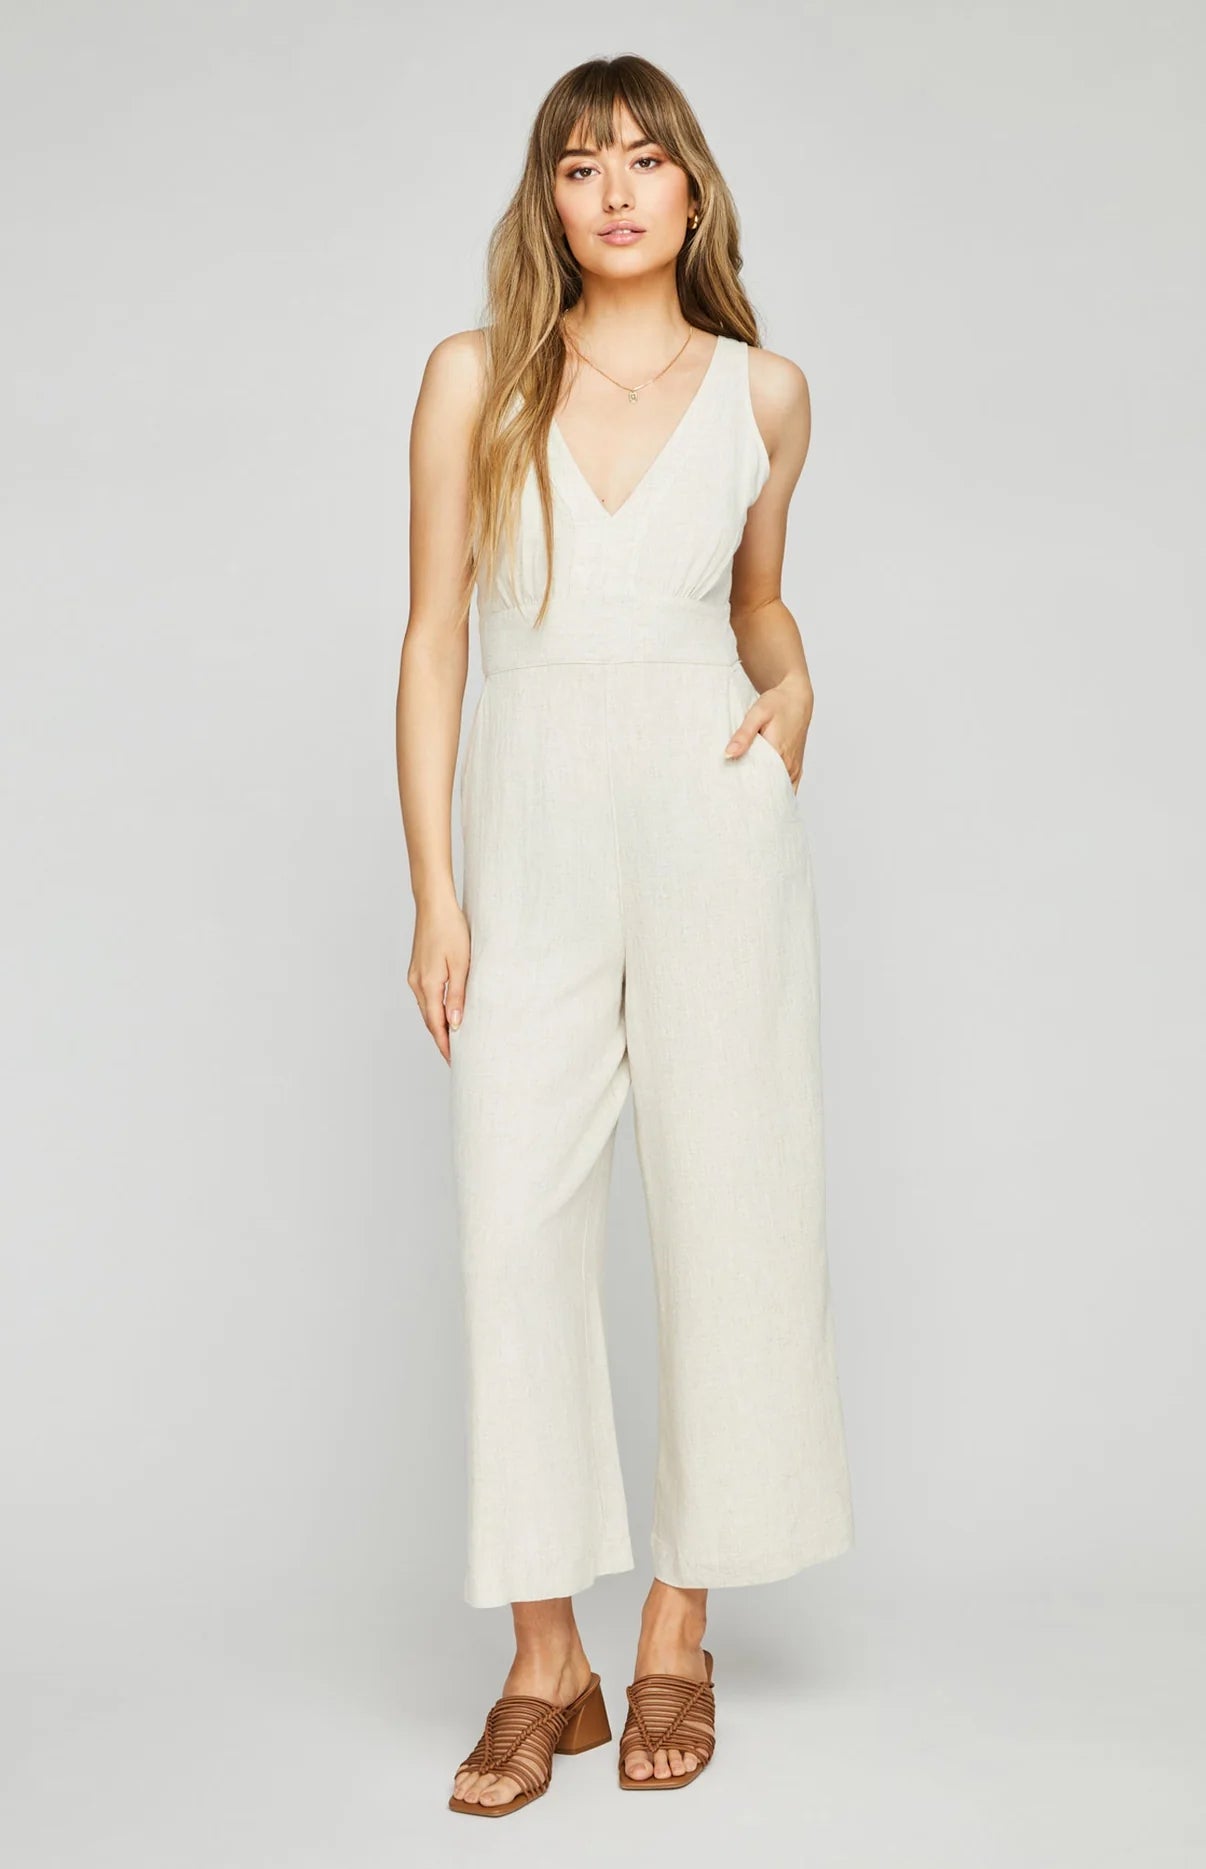 The Gianna Jumpsuit by Gentle Fawn